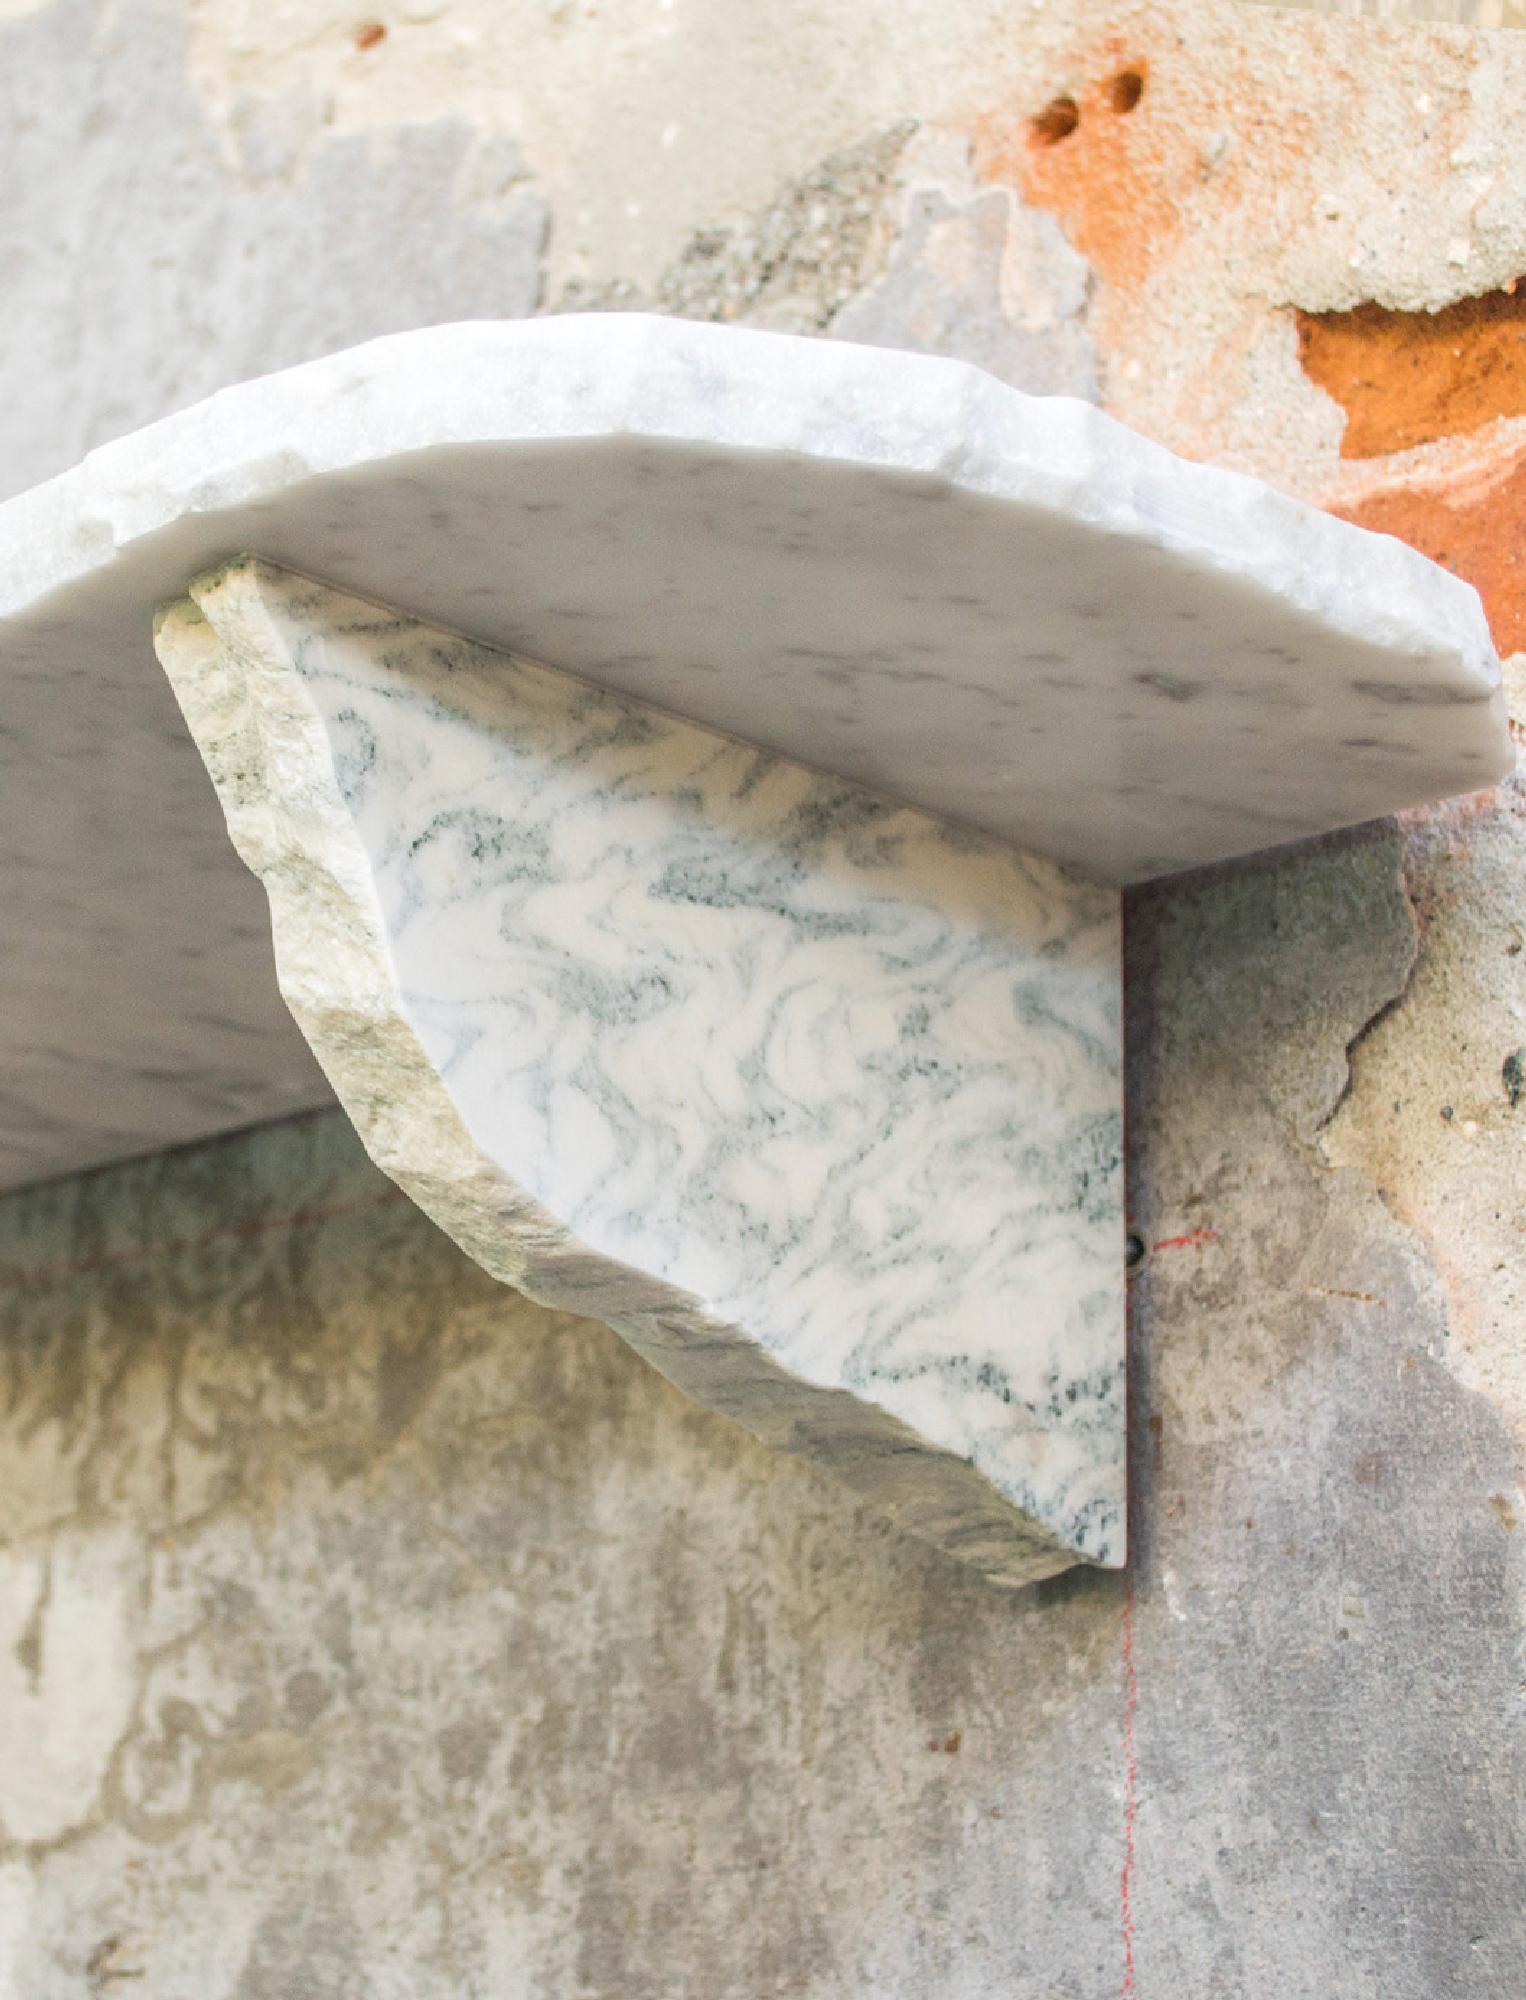 This sculptural shelf is completely handmade in Carrara savaging marble elements from the production cycle. Duo Shelf is a product of sustainable design promoting circular economy being produced from savaged materials. Every piece is unique and